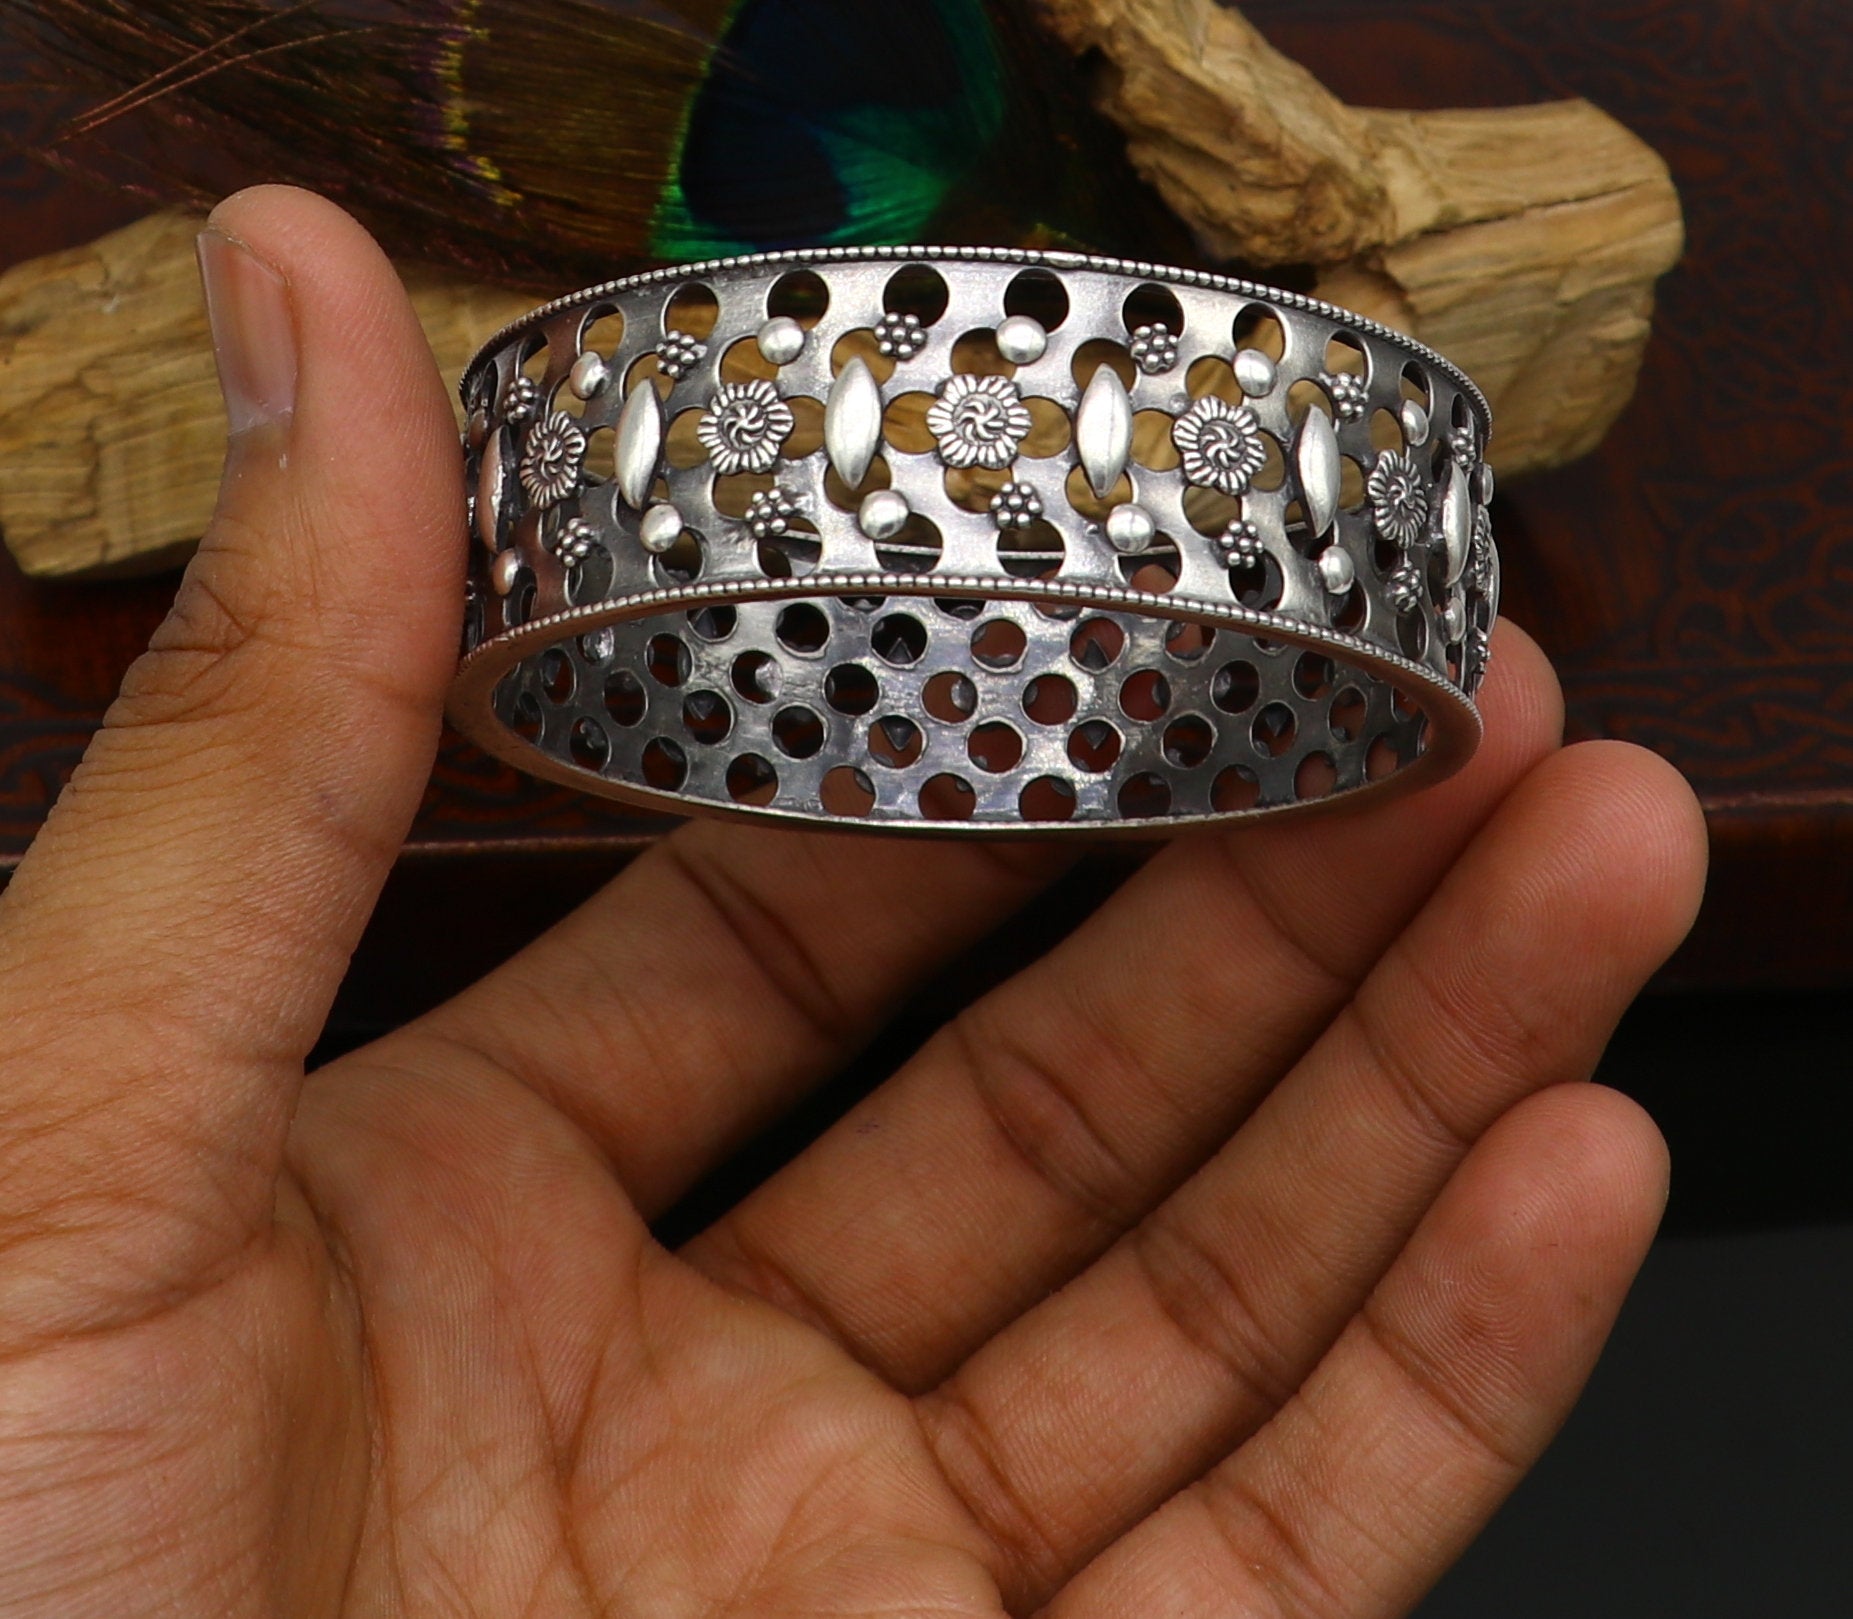 925 sterling silver vintage style handcrafted flower design kada bangle bracelet tribal wedding jewelry for girl's from india ba98 - TRIBAL ORNAMENTS